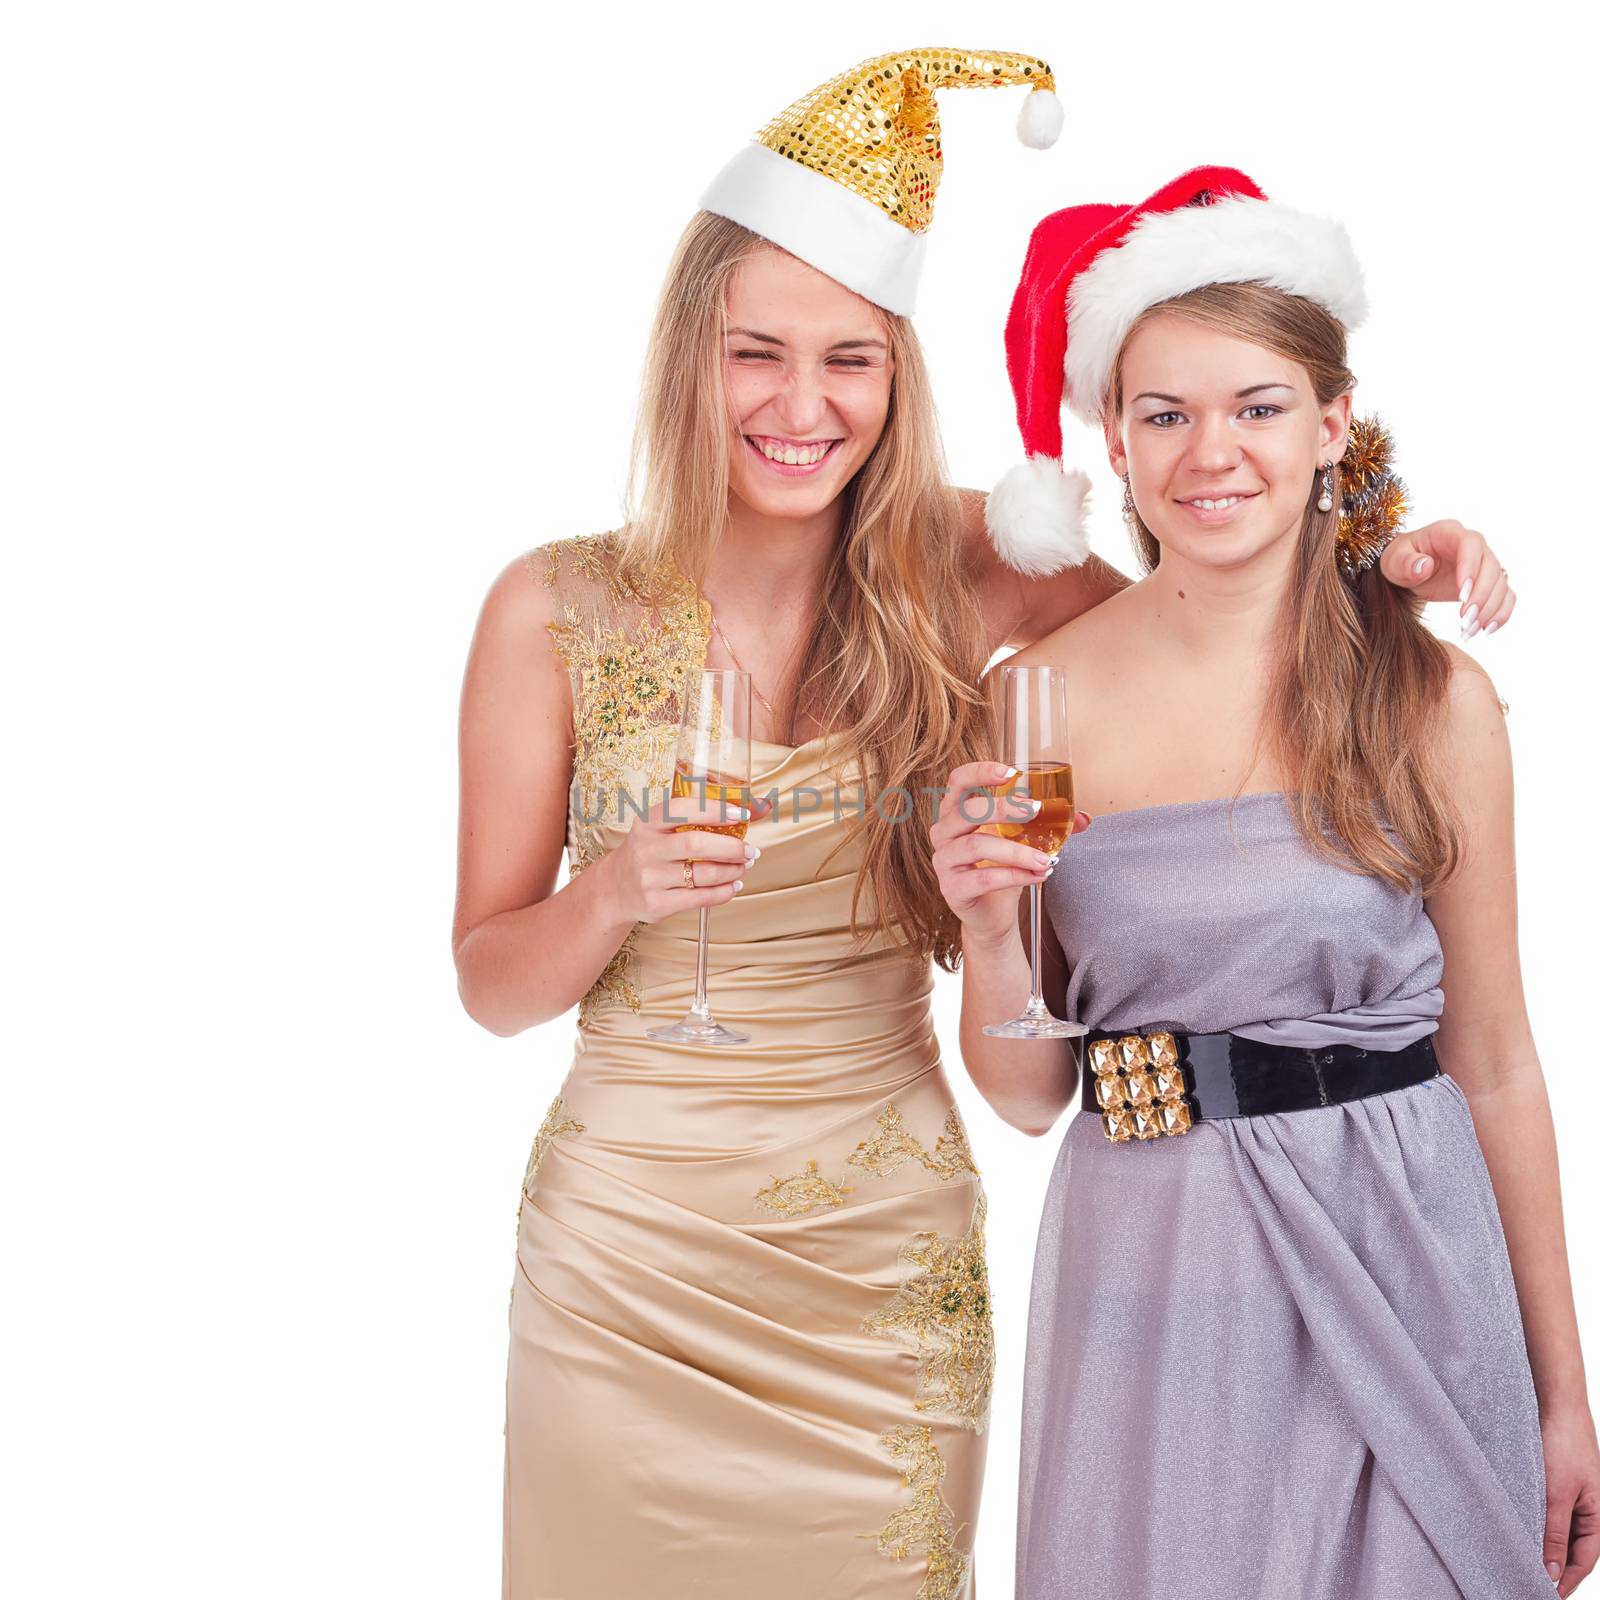 Two drunken girls celebrate with alcohol, isolated on white background